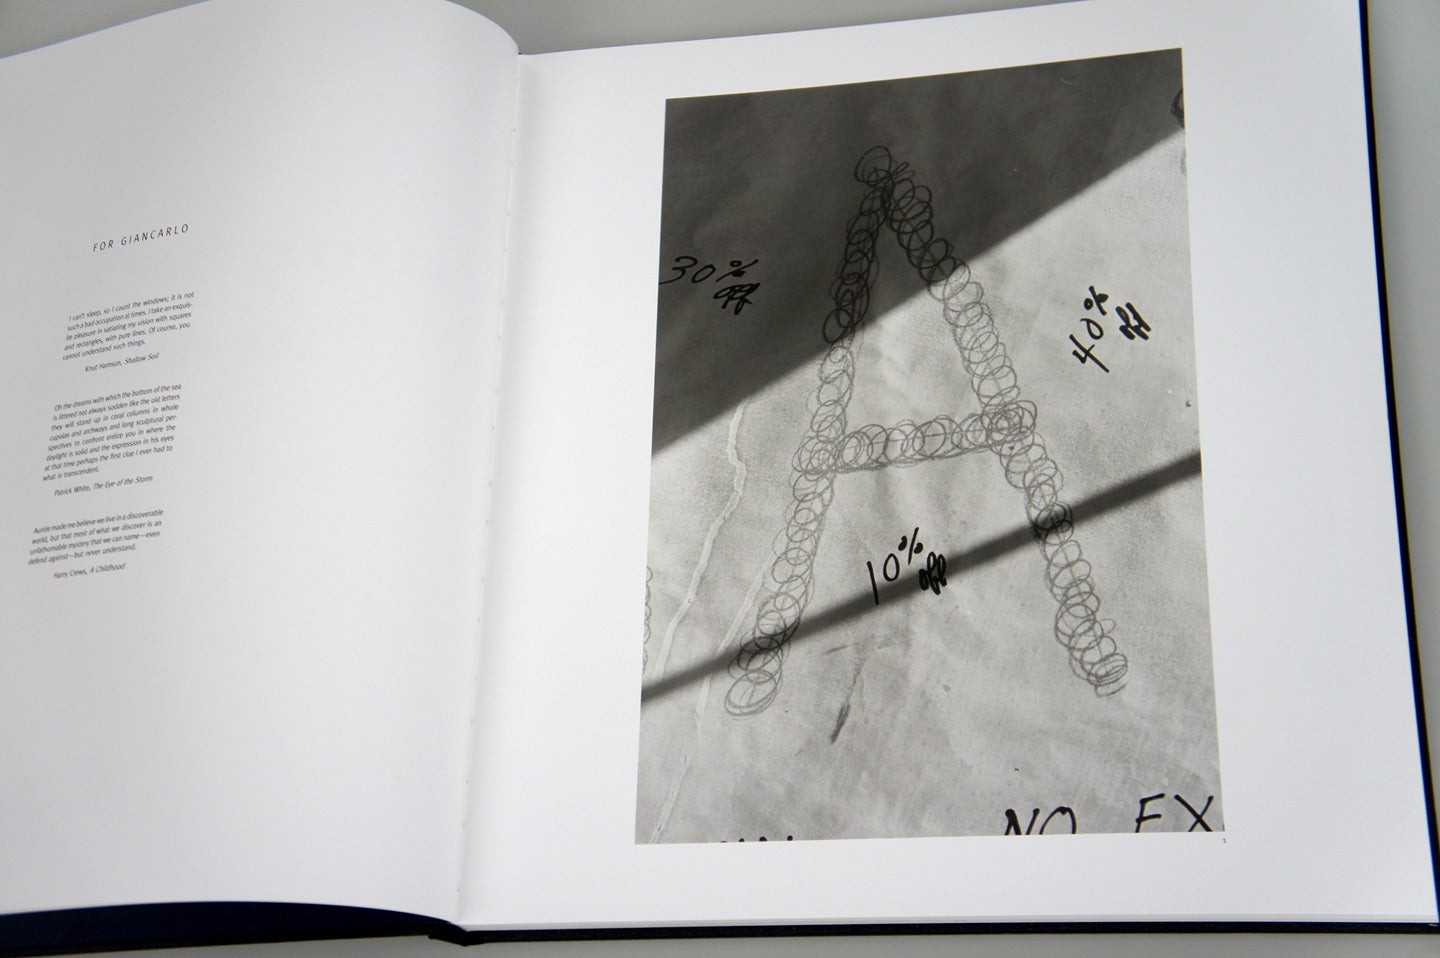 Lee Friedlander: Letters from the People (Special Limited Edition with One Vintage Gelatin Silver Print: "K")